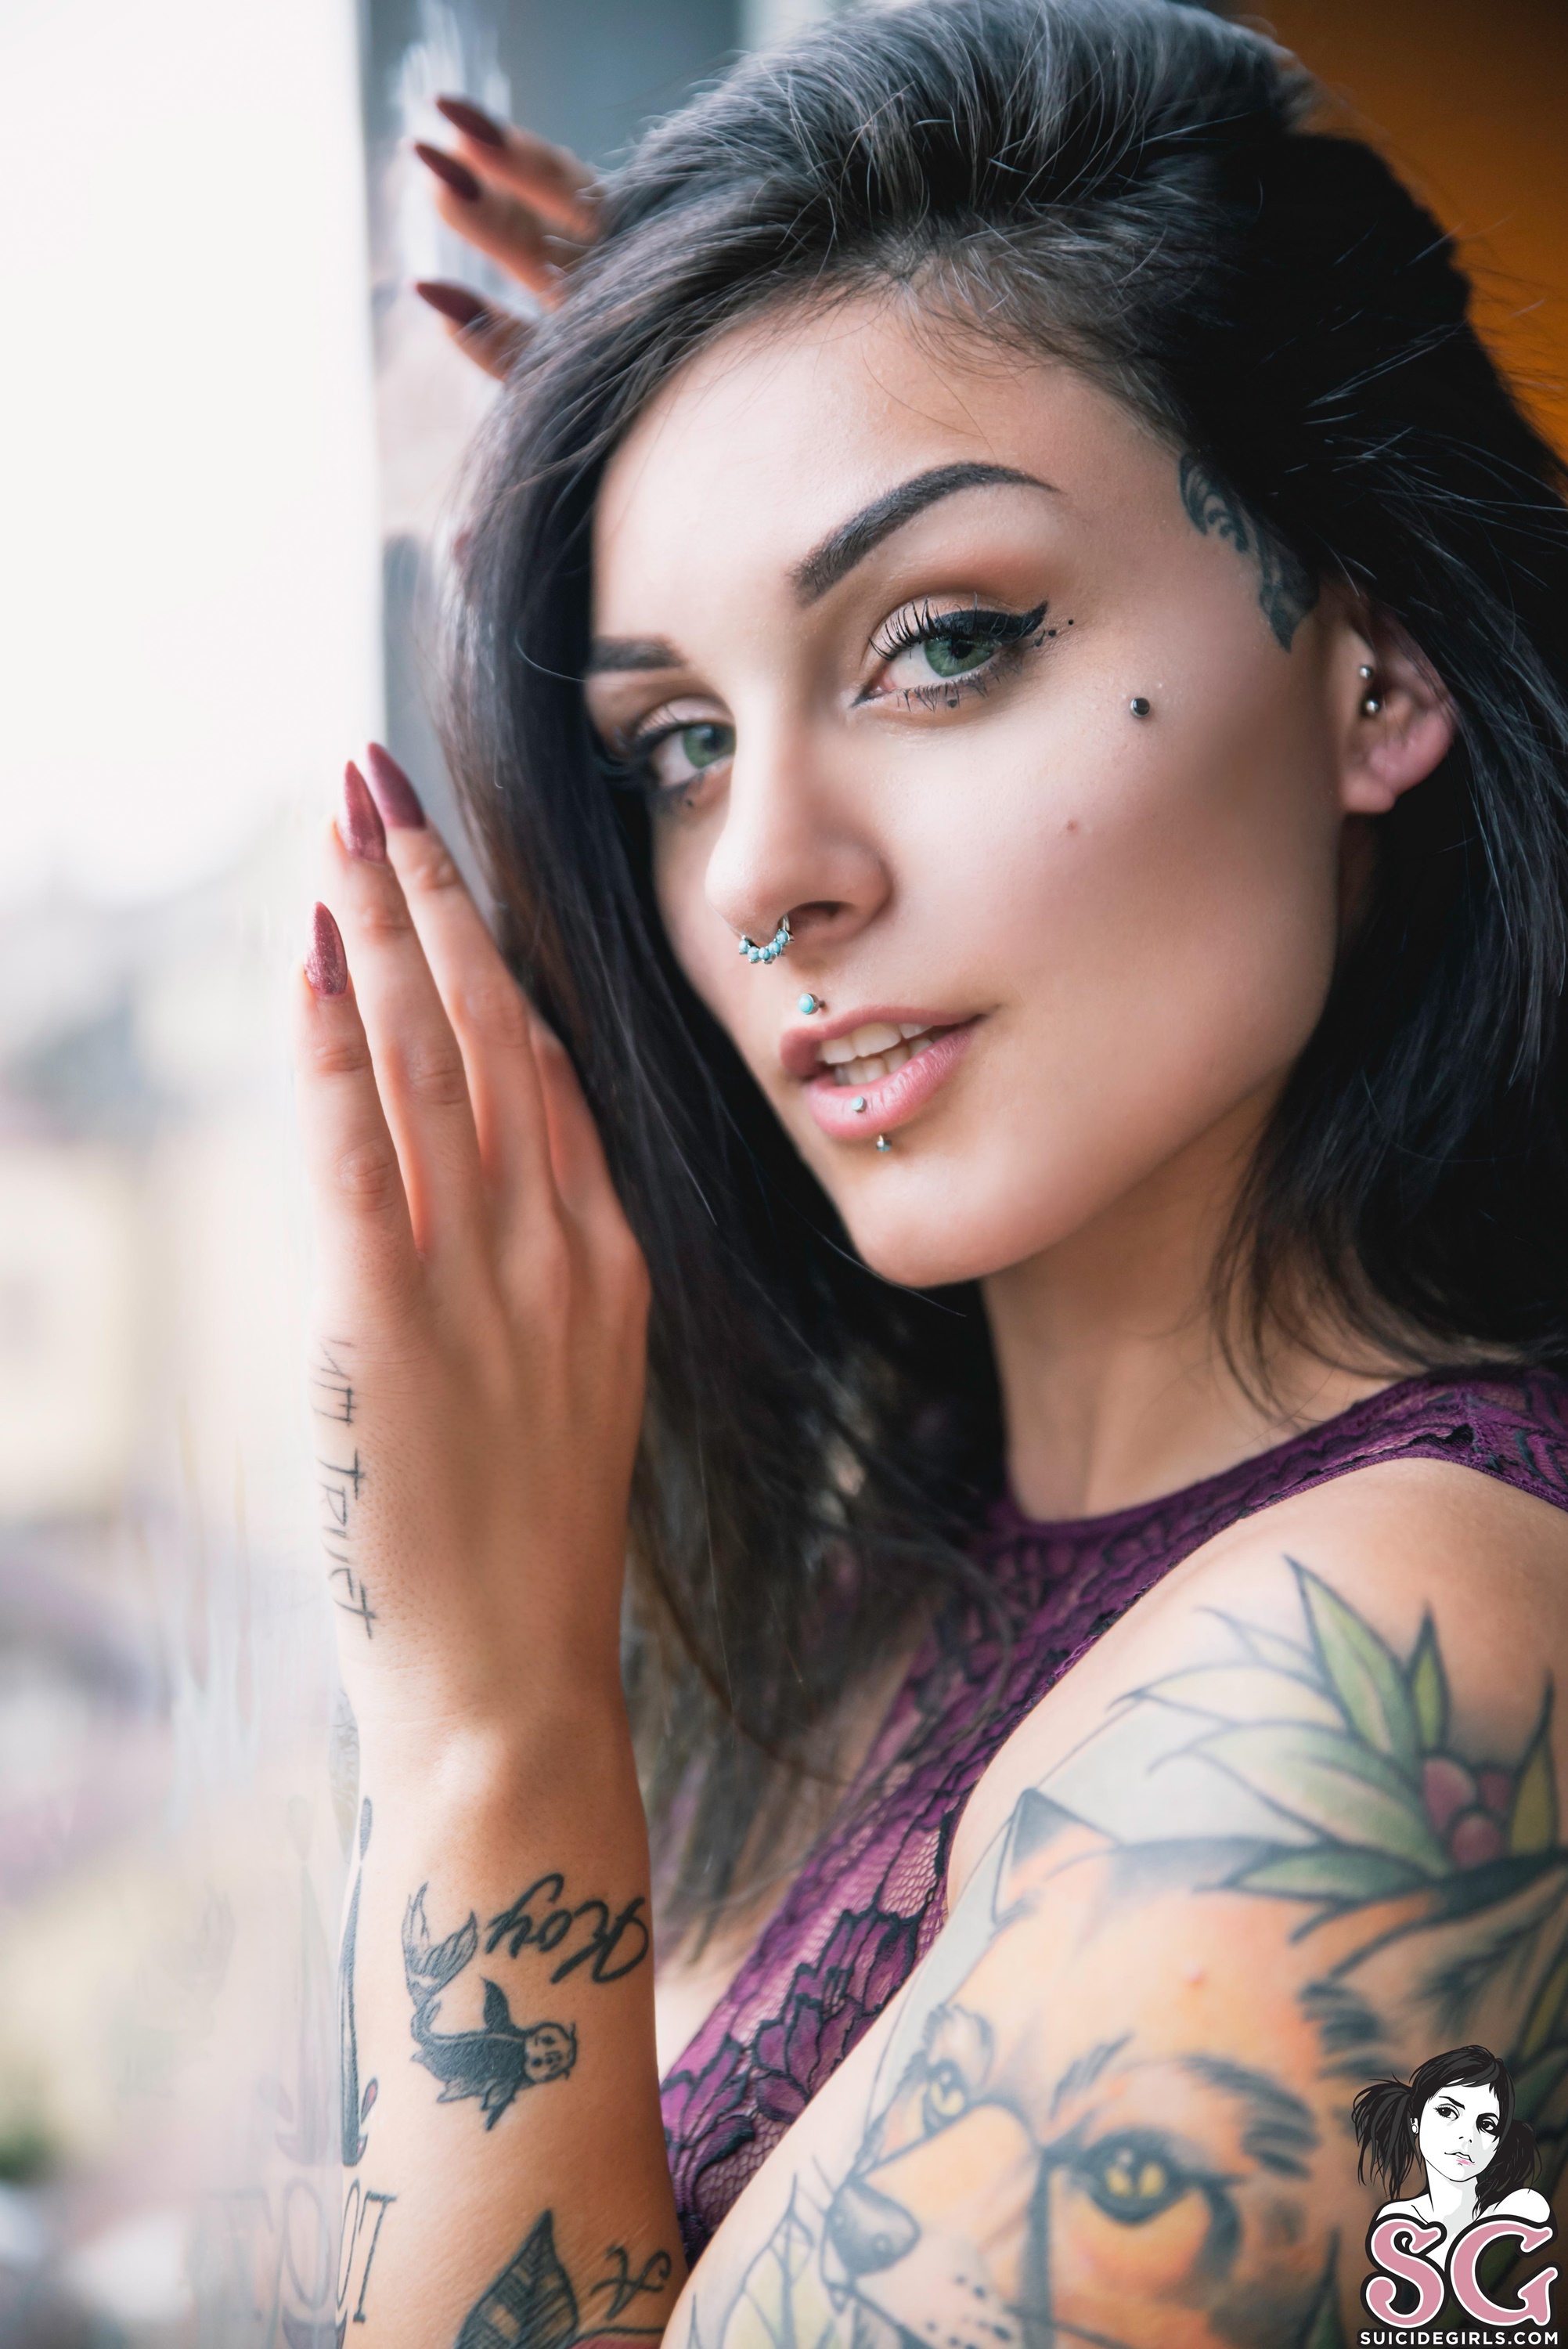 Our face tattoos were supposed to be empowering but we were young or drunk  and regret them every day – The Sun | The Sun